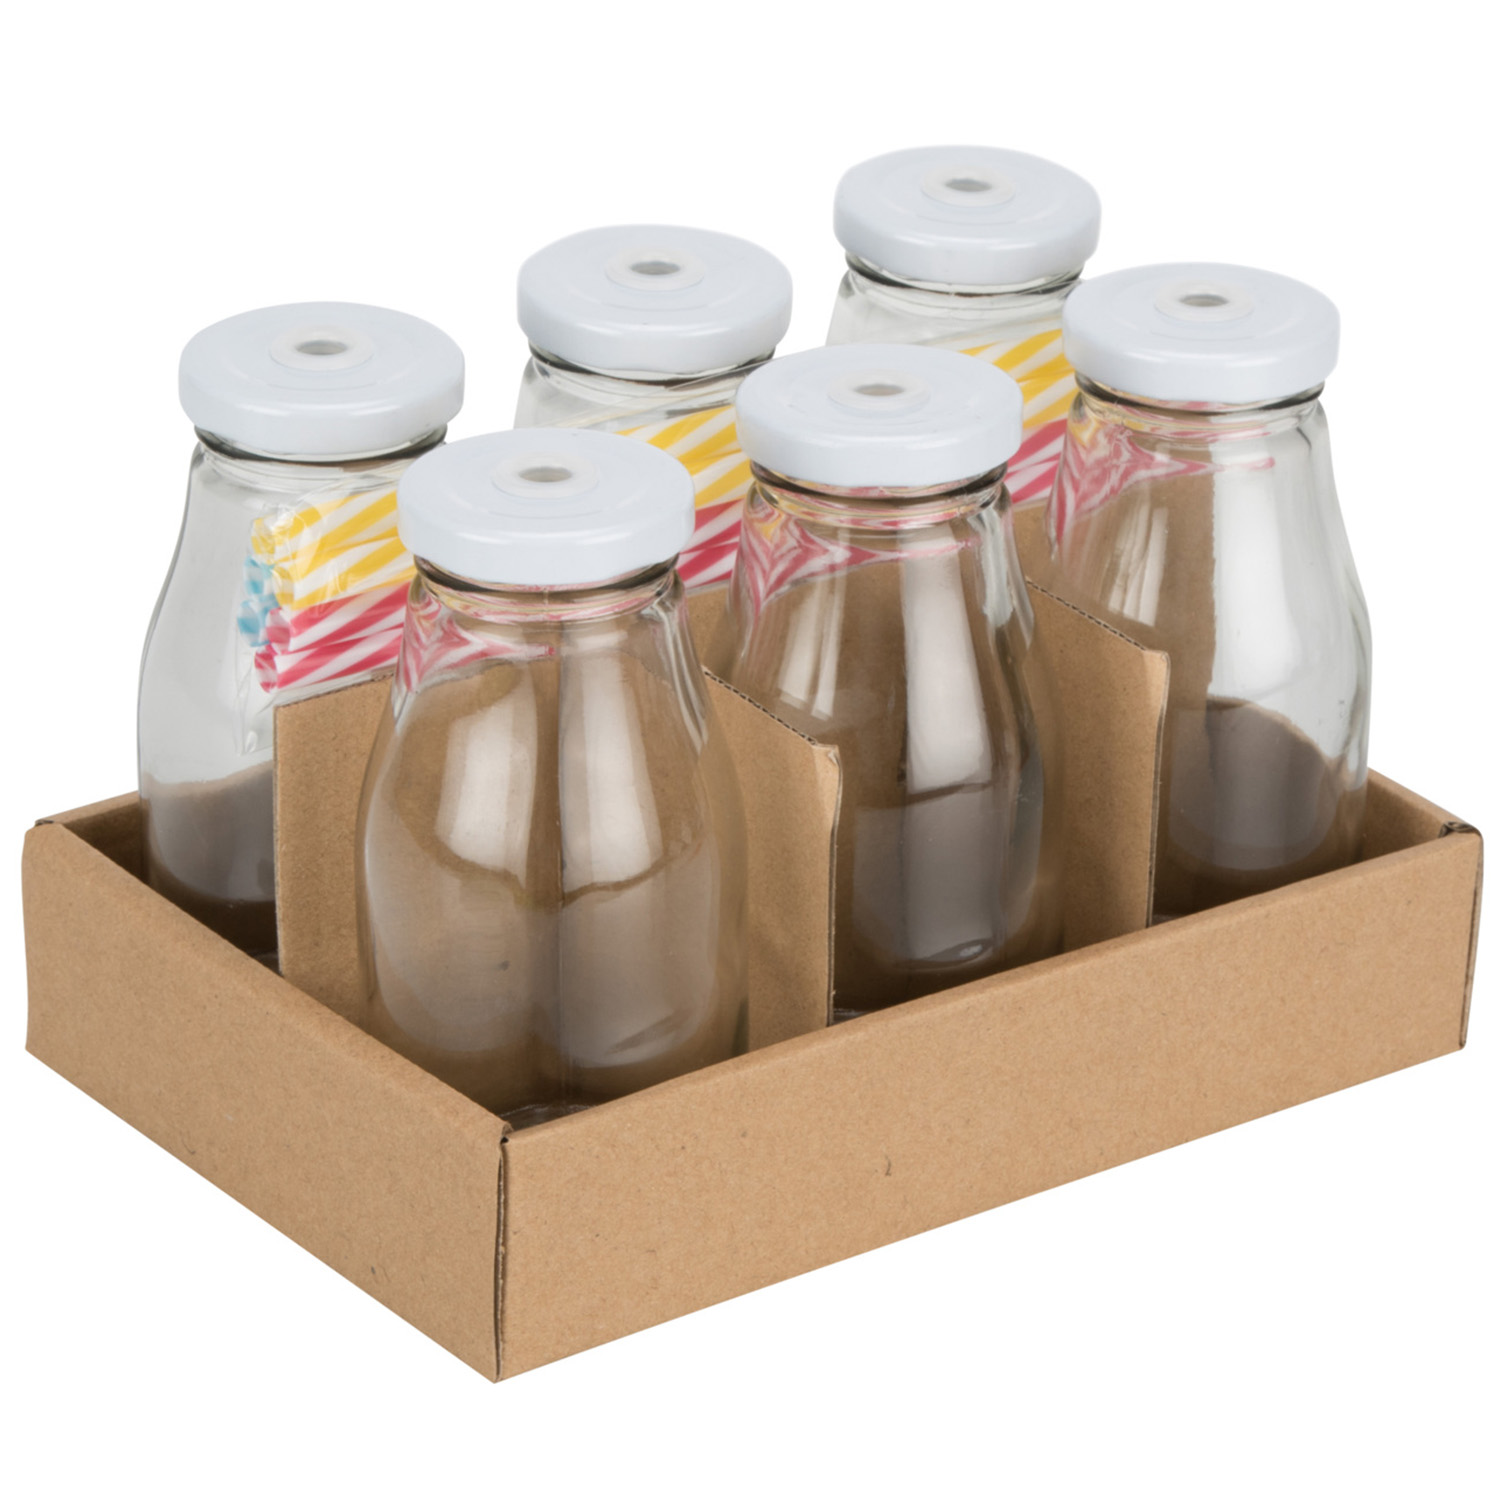 Milk Bottles with Straws and Lids Set of 6 Image 1